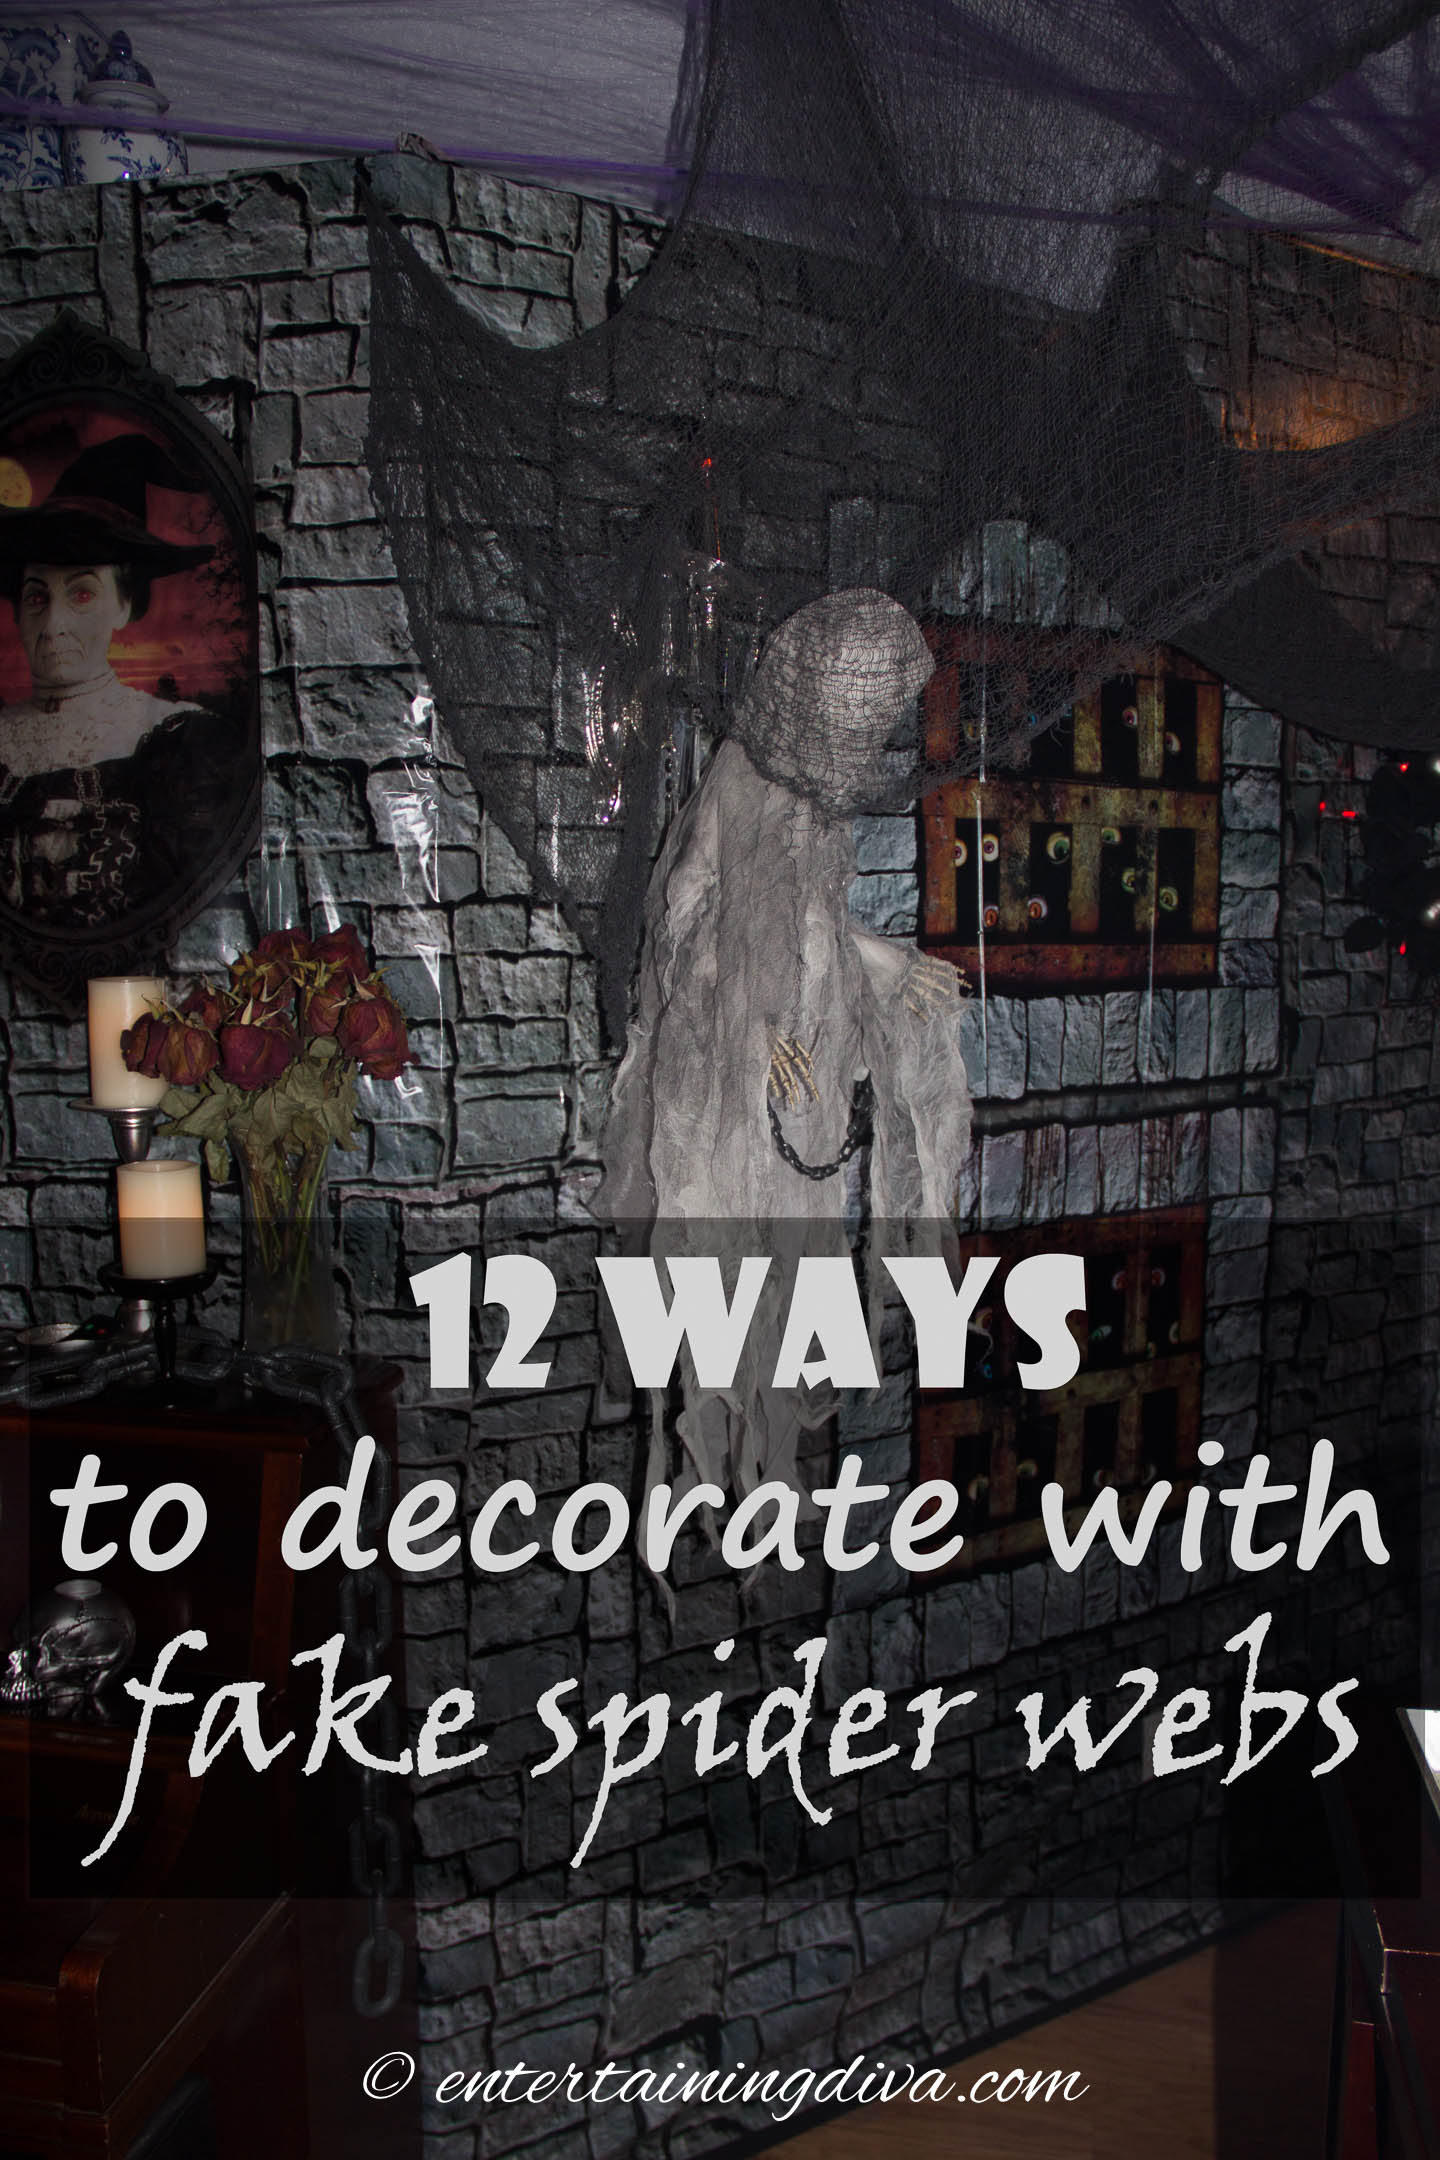 12 ways to decorate with fake spider webs